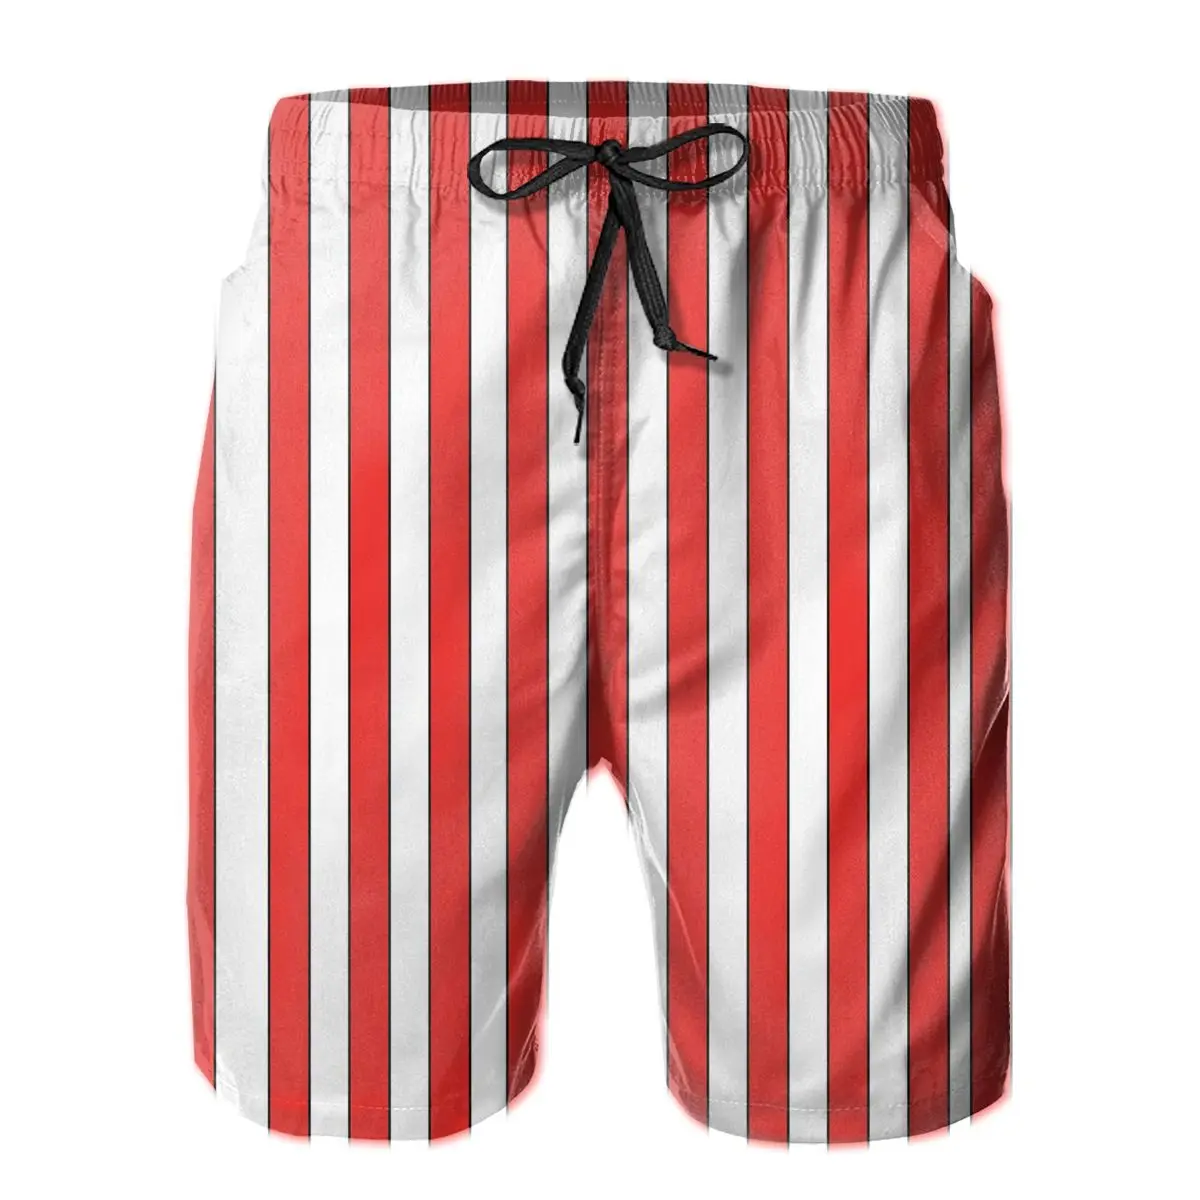 

Causal Breathable Quick Dry Humor Graphic R333 running RED BLACK WHITE VERTICAL STRIPE Hawaii Pants